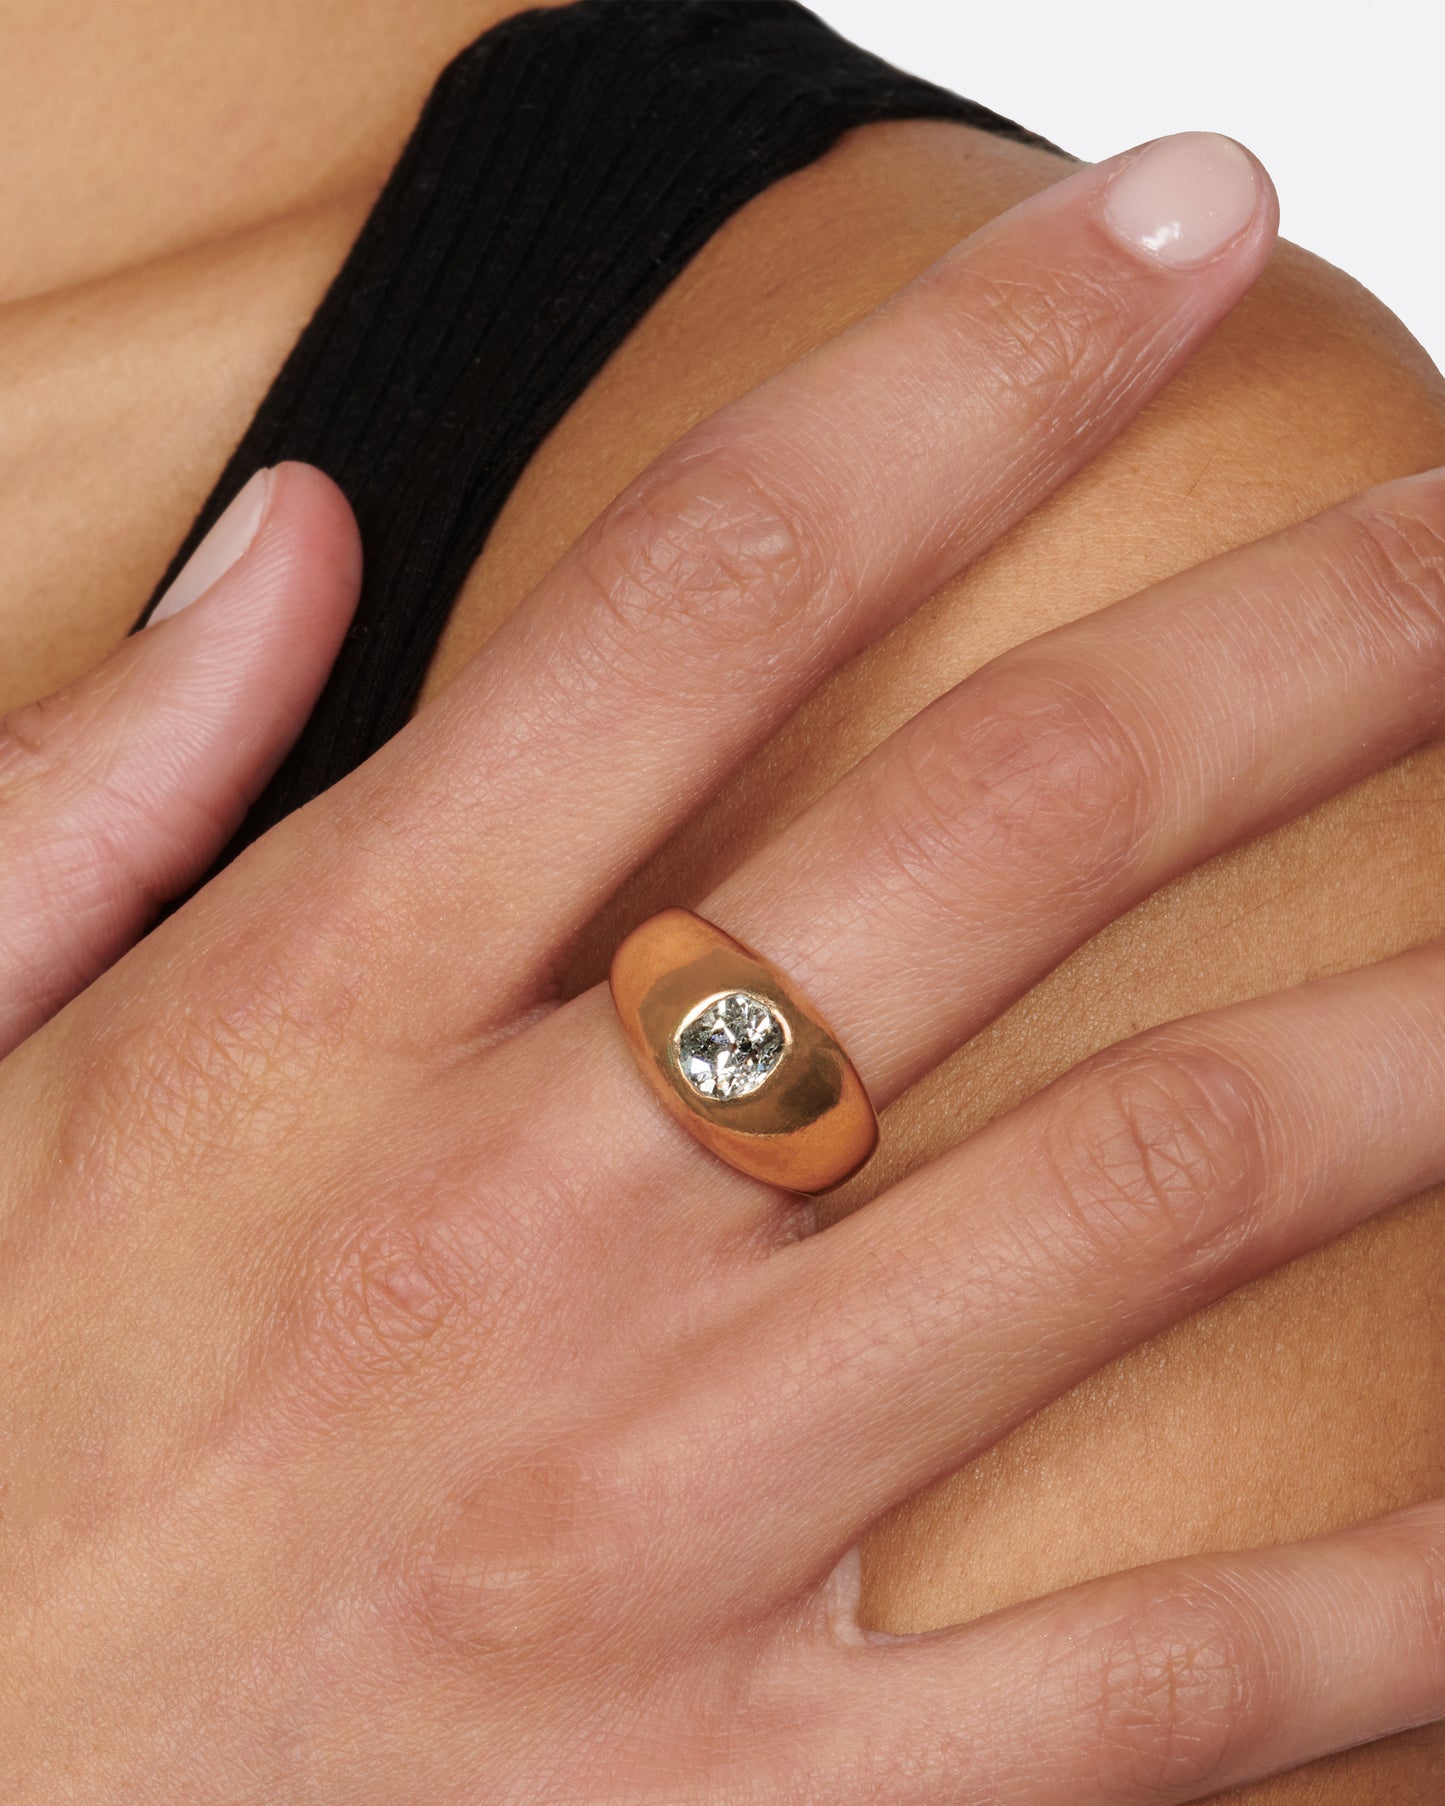 A classic, vintage dome ring with an oval old mine cut diamond sunk into the top of it.